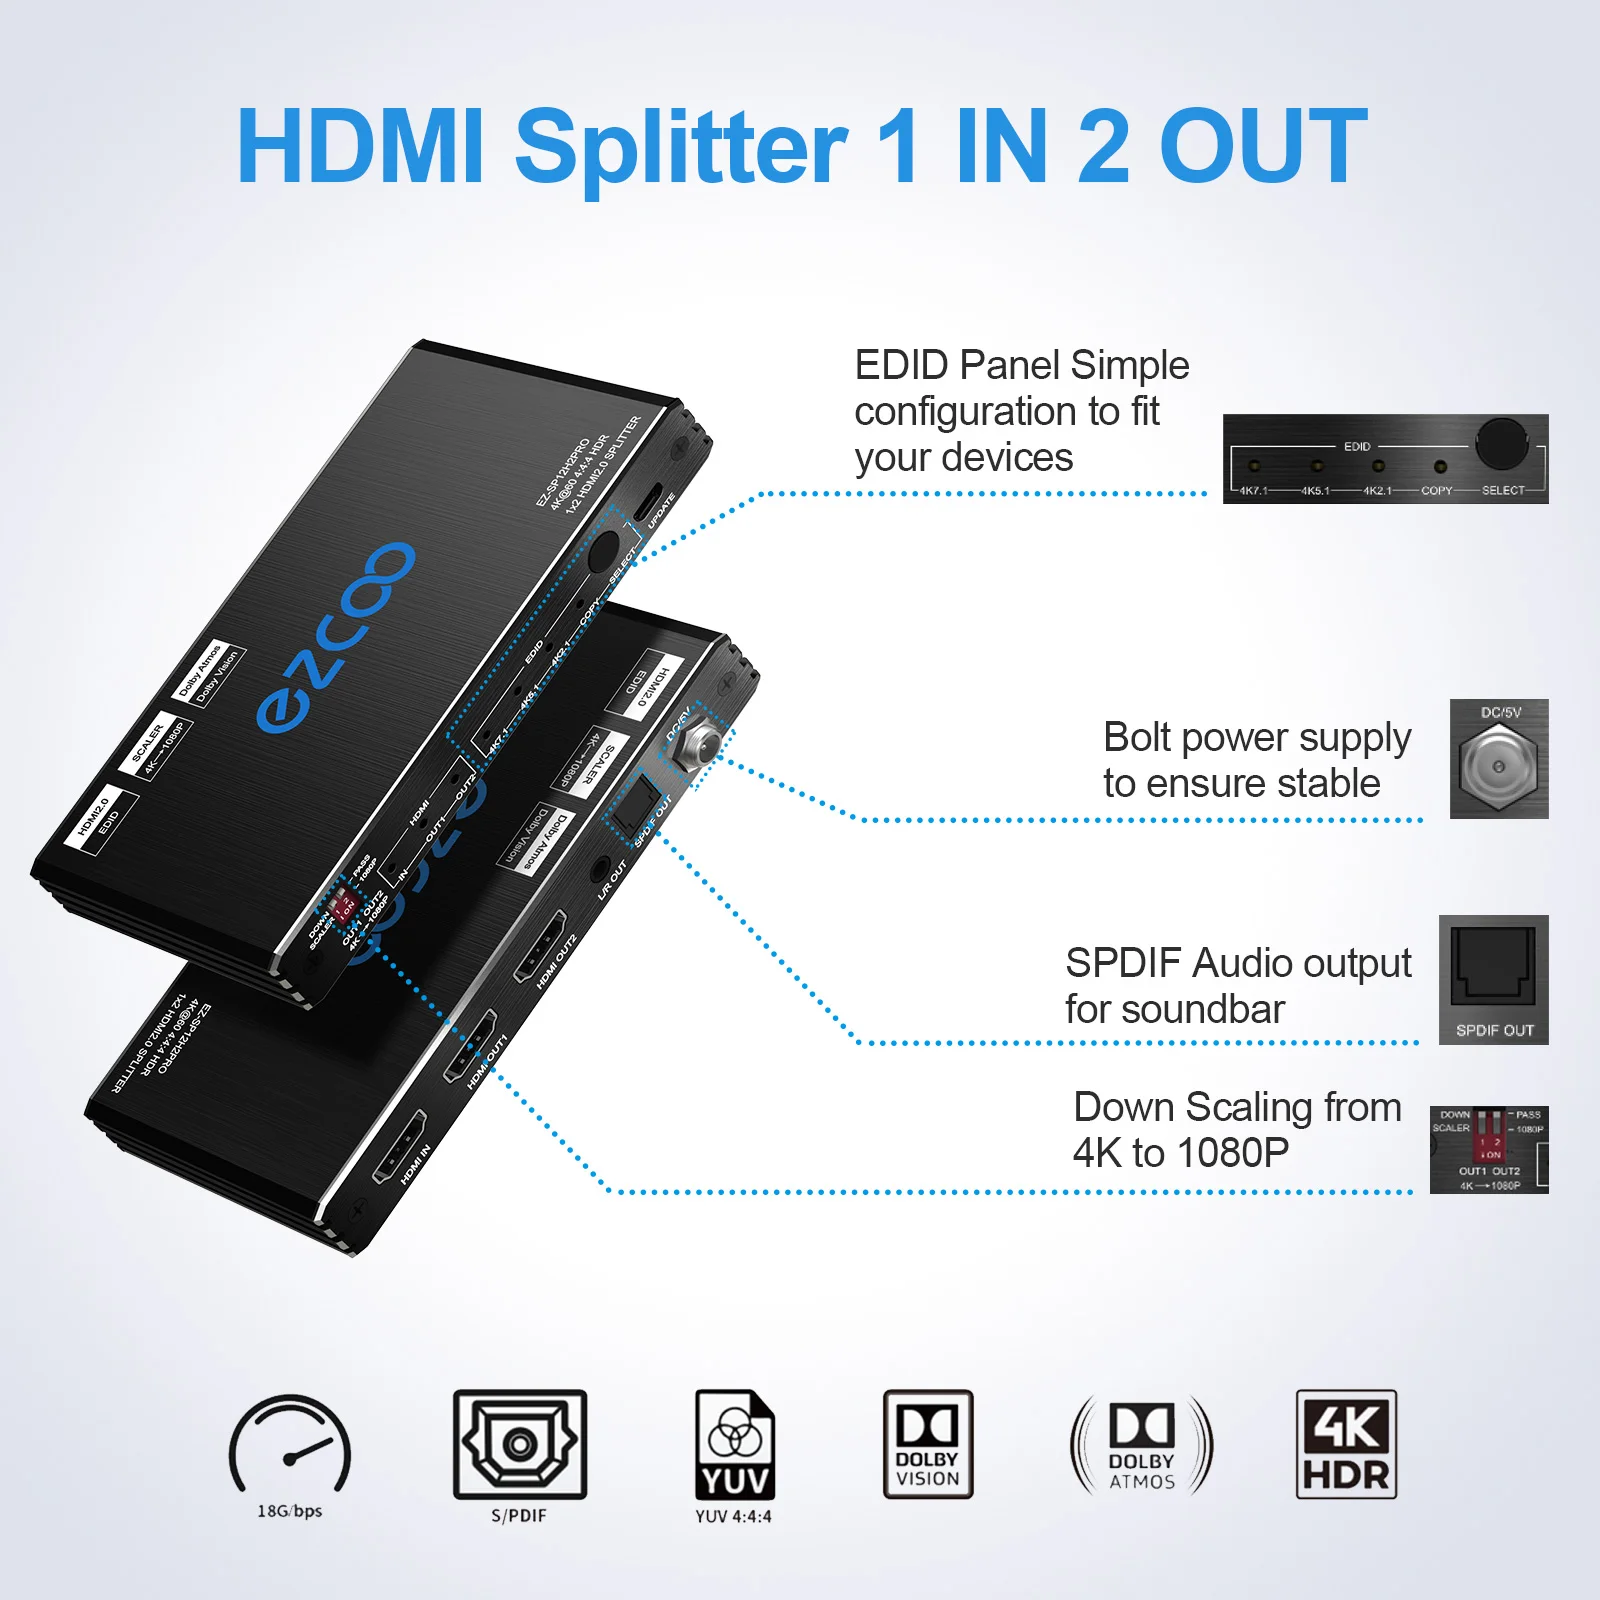 4K HDMI Splitter 1x2 HDR Vision Atmos 18Gbps- HDMI Scaler 4K 1080P Sync,4K  HDMI Splitter 1 in 2 out 60Hz 4:4:4 HDCP2.2, EDID Scaler Panel  Switch,Firmware Upgrade,USB Power,Windows IOS,Mini Case SP12H2 